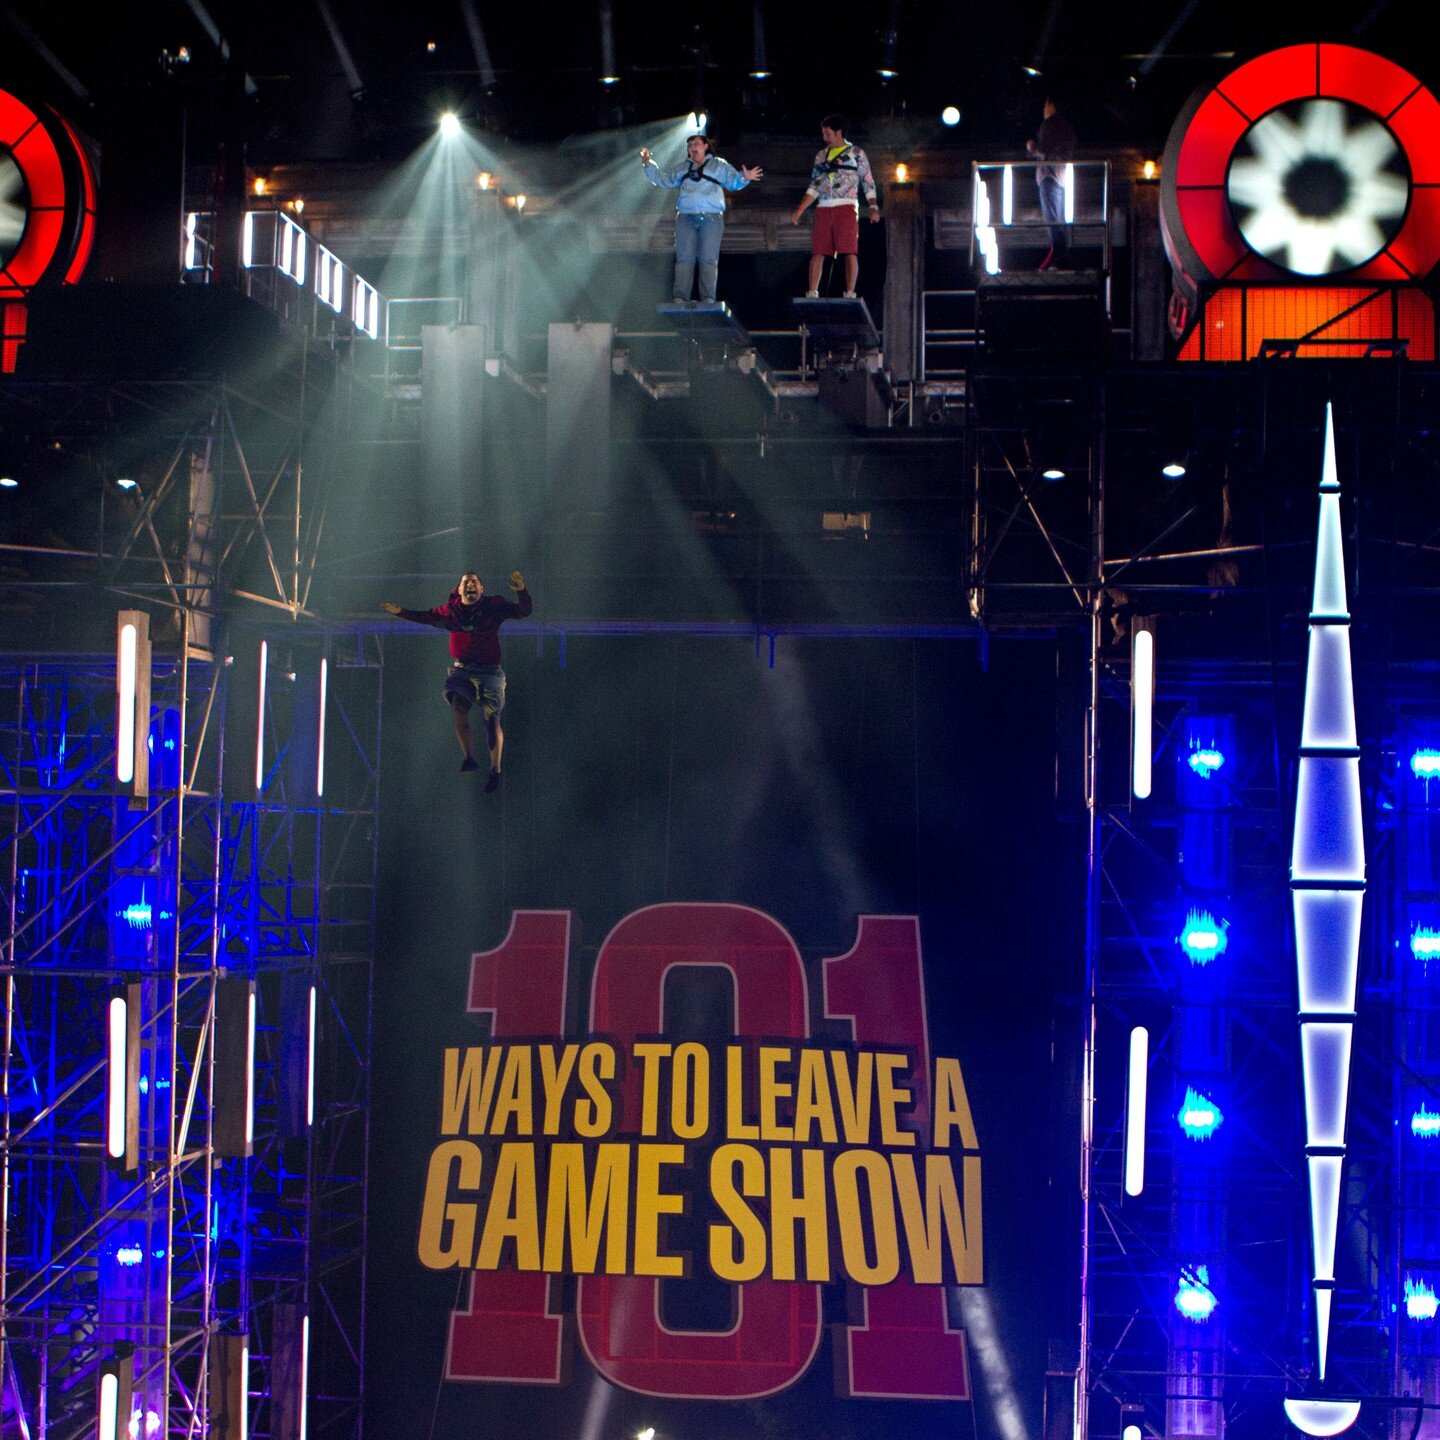 The finale tower for 101 Ways To Leave a Gameshow was 120' tall. 

...Quite the drop.